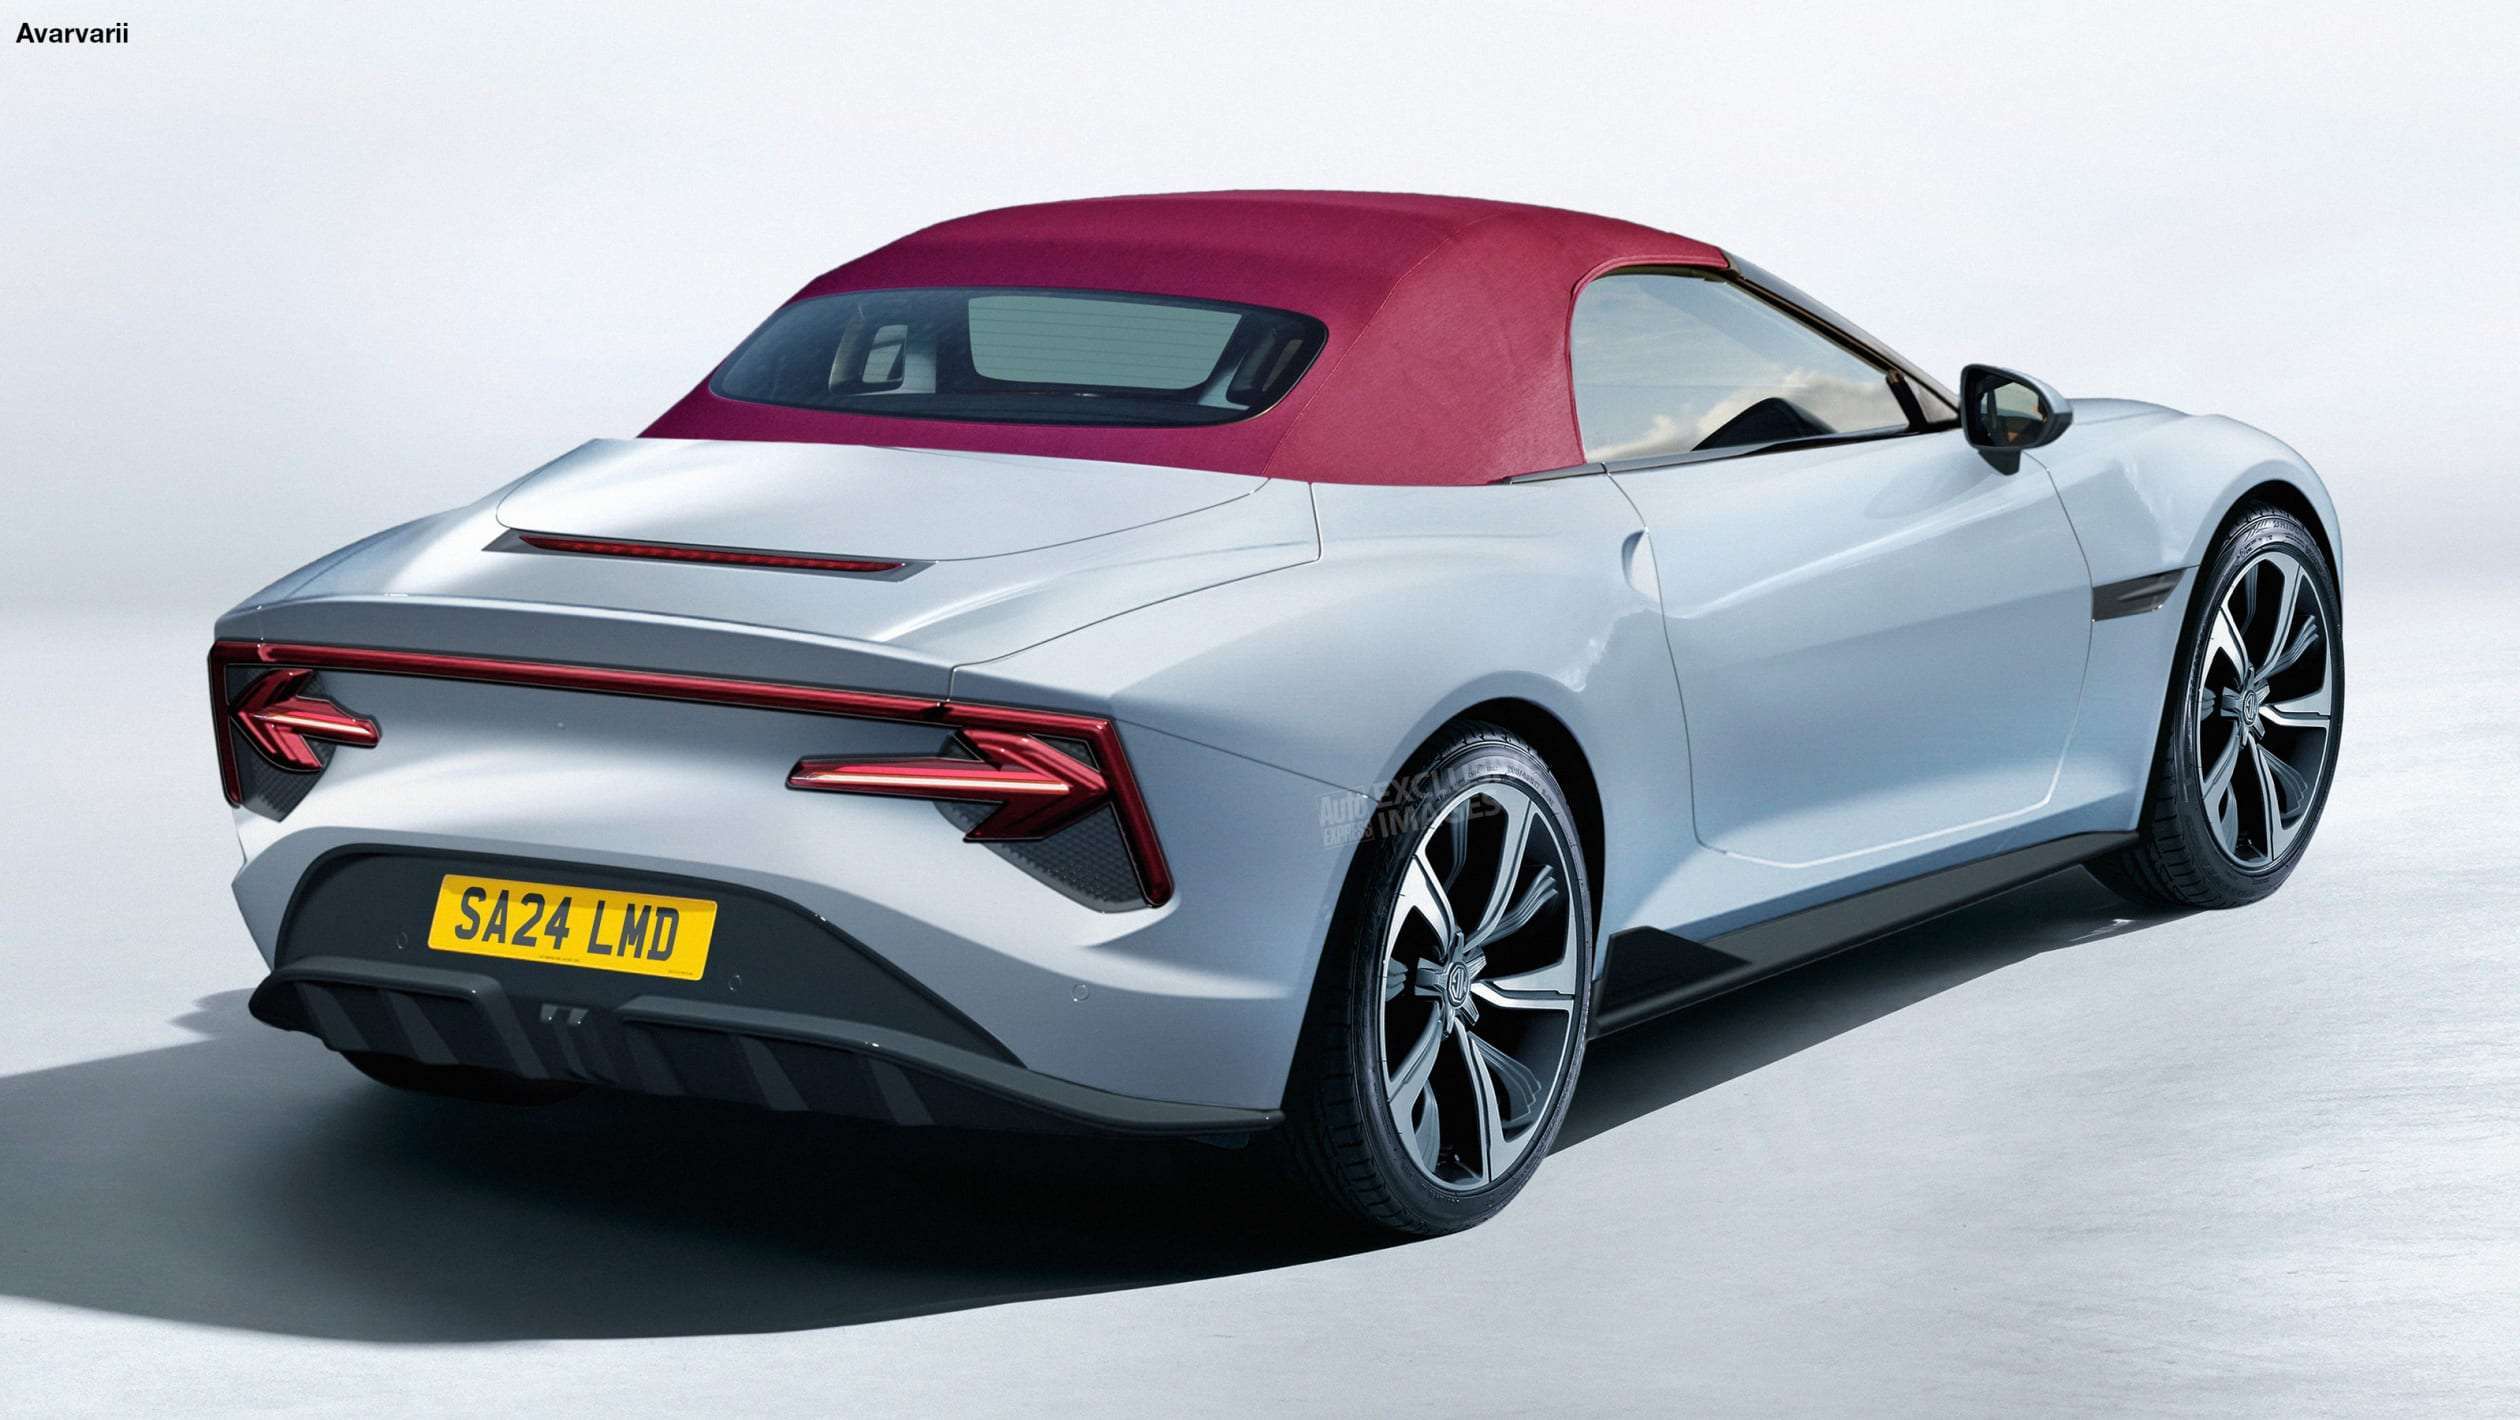 MG roadster exclusive image - rear